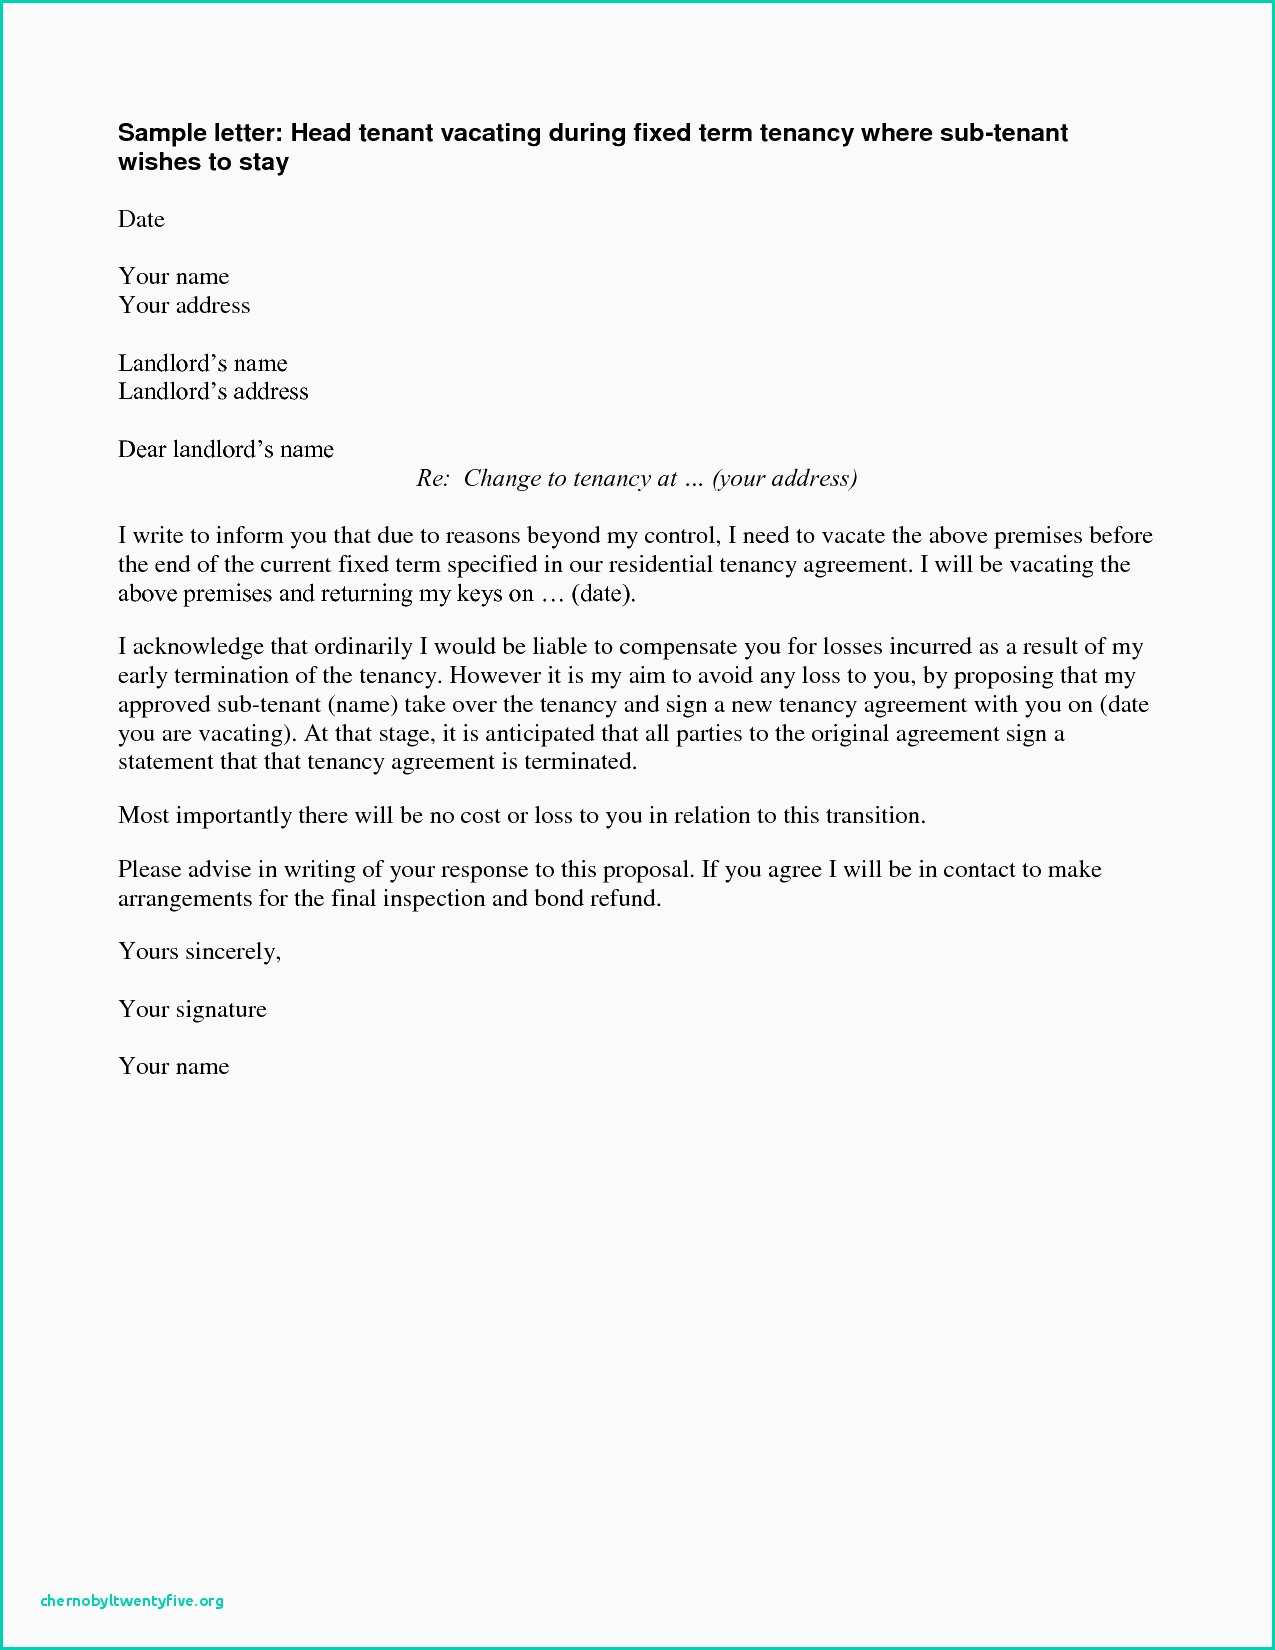 Sample Letter To Break Lease from mthomearts.com